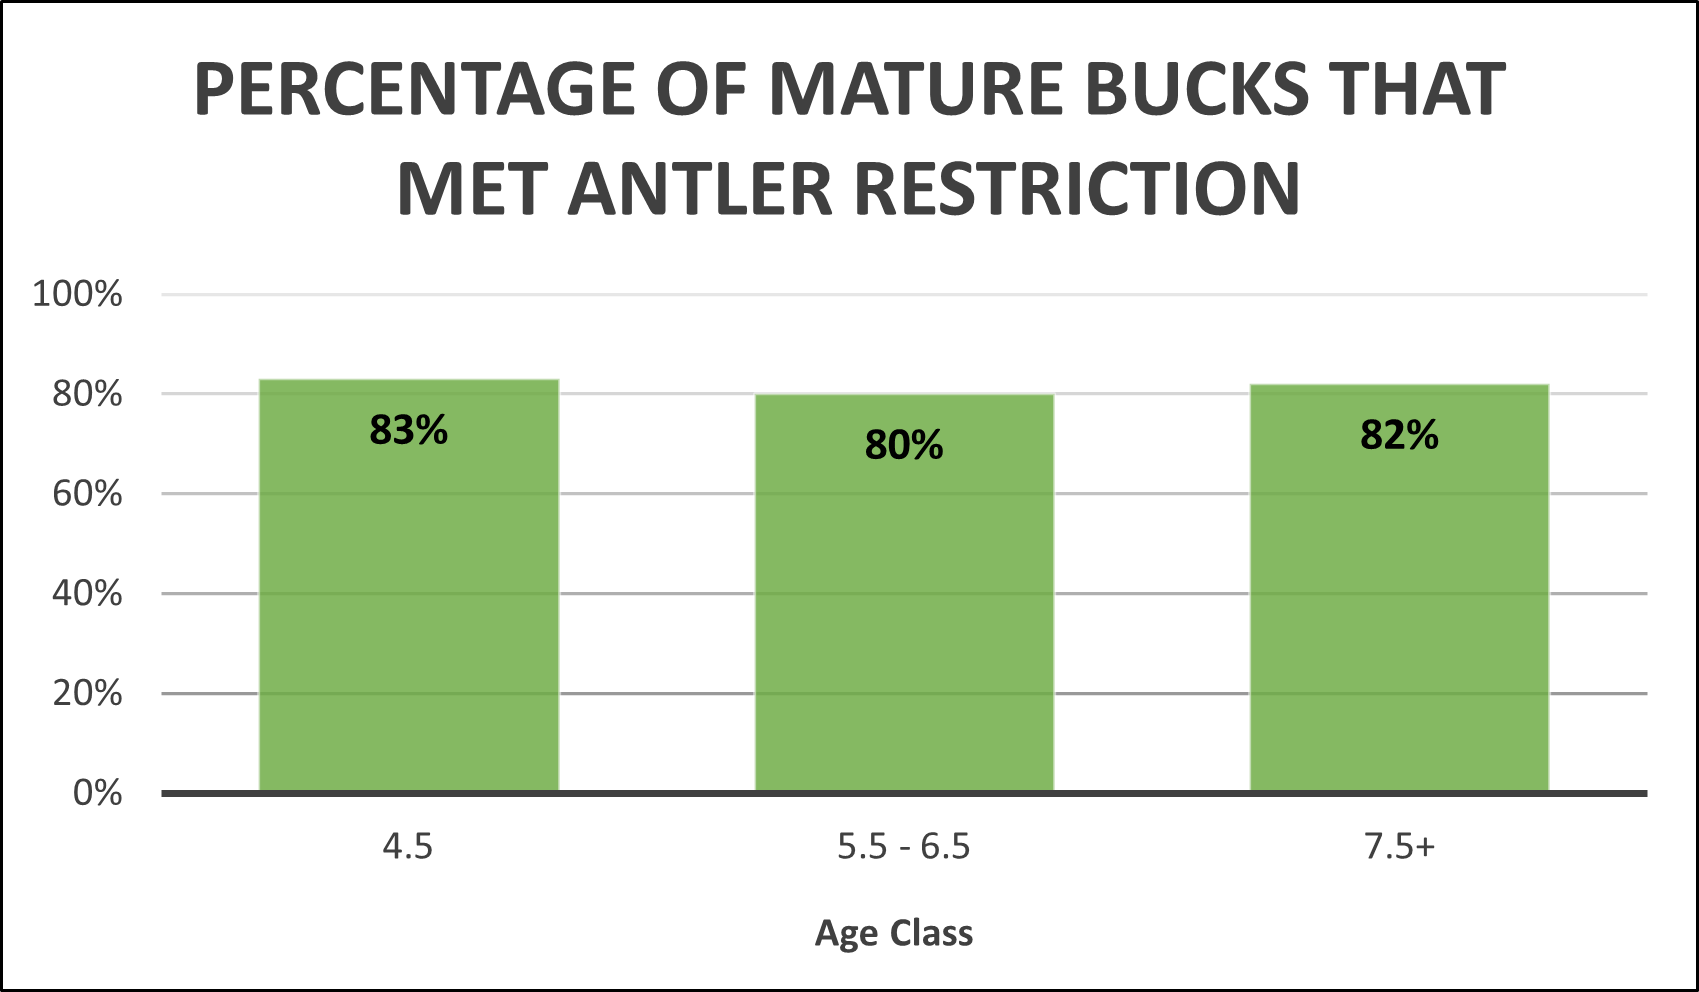 Percentage of mature bucks meeting the antler restriction chart